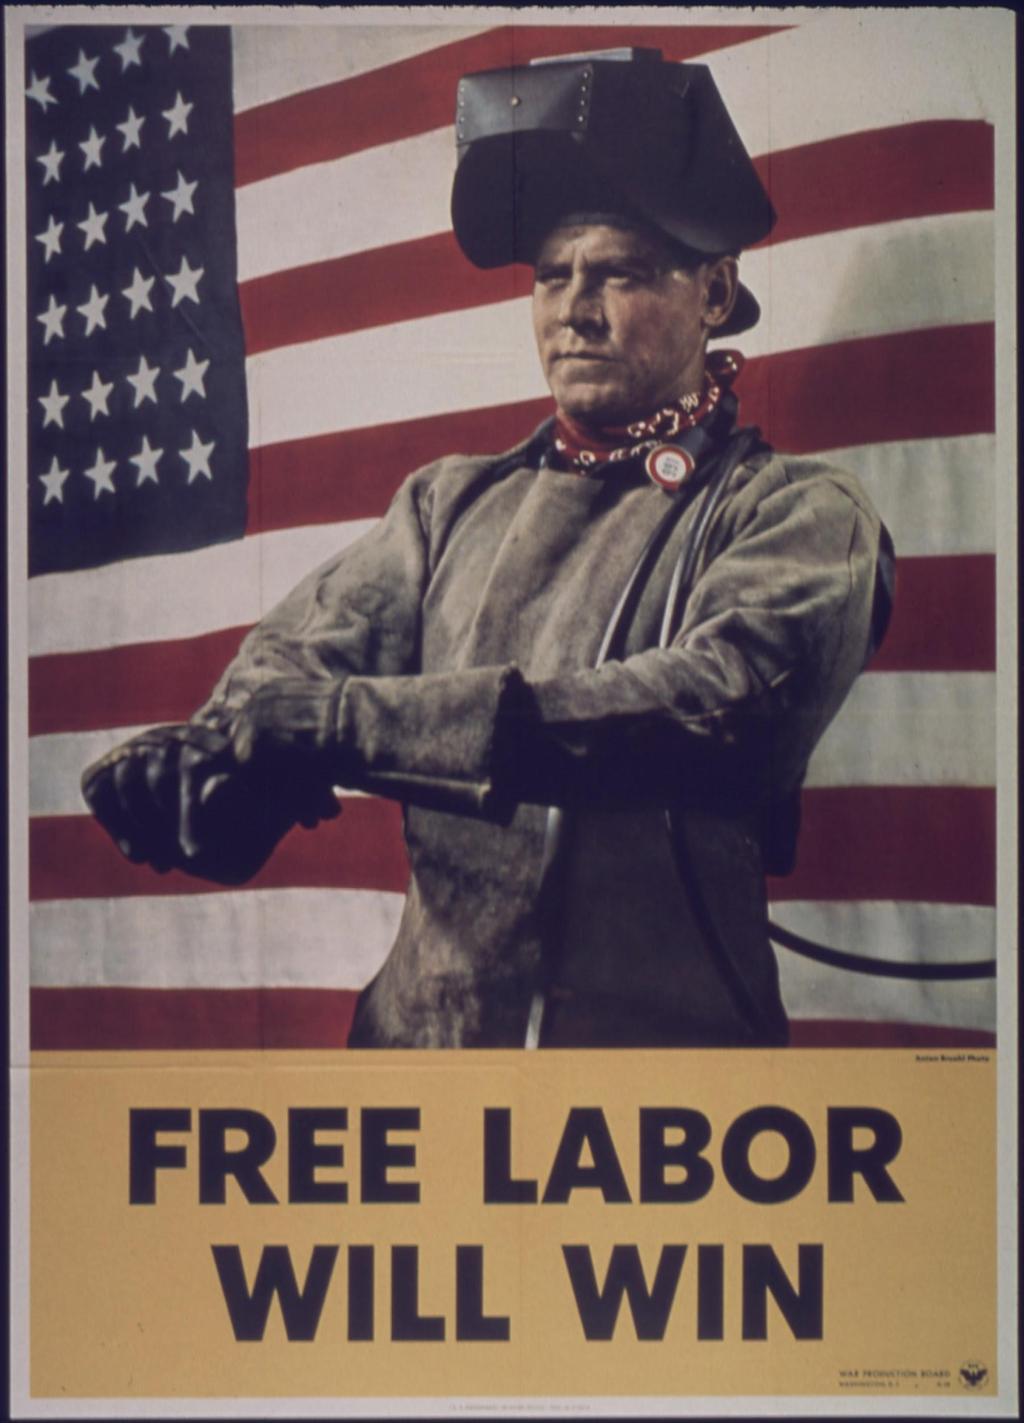 Free Labor Adait Mou Most workers had lives but were proud of their personal freedoms and considered themselves sovereign individual. The belief in the freedom of the individual was strong.